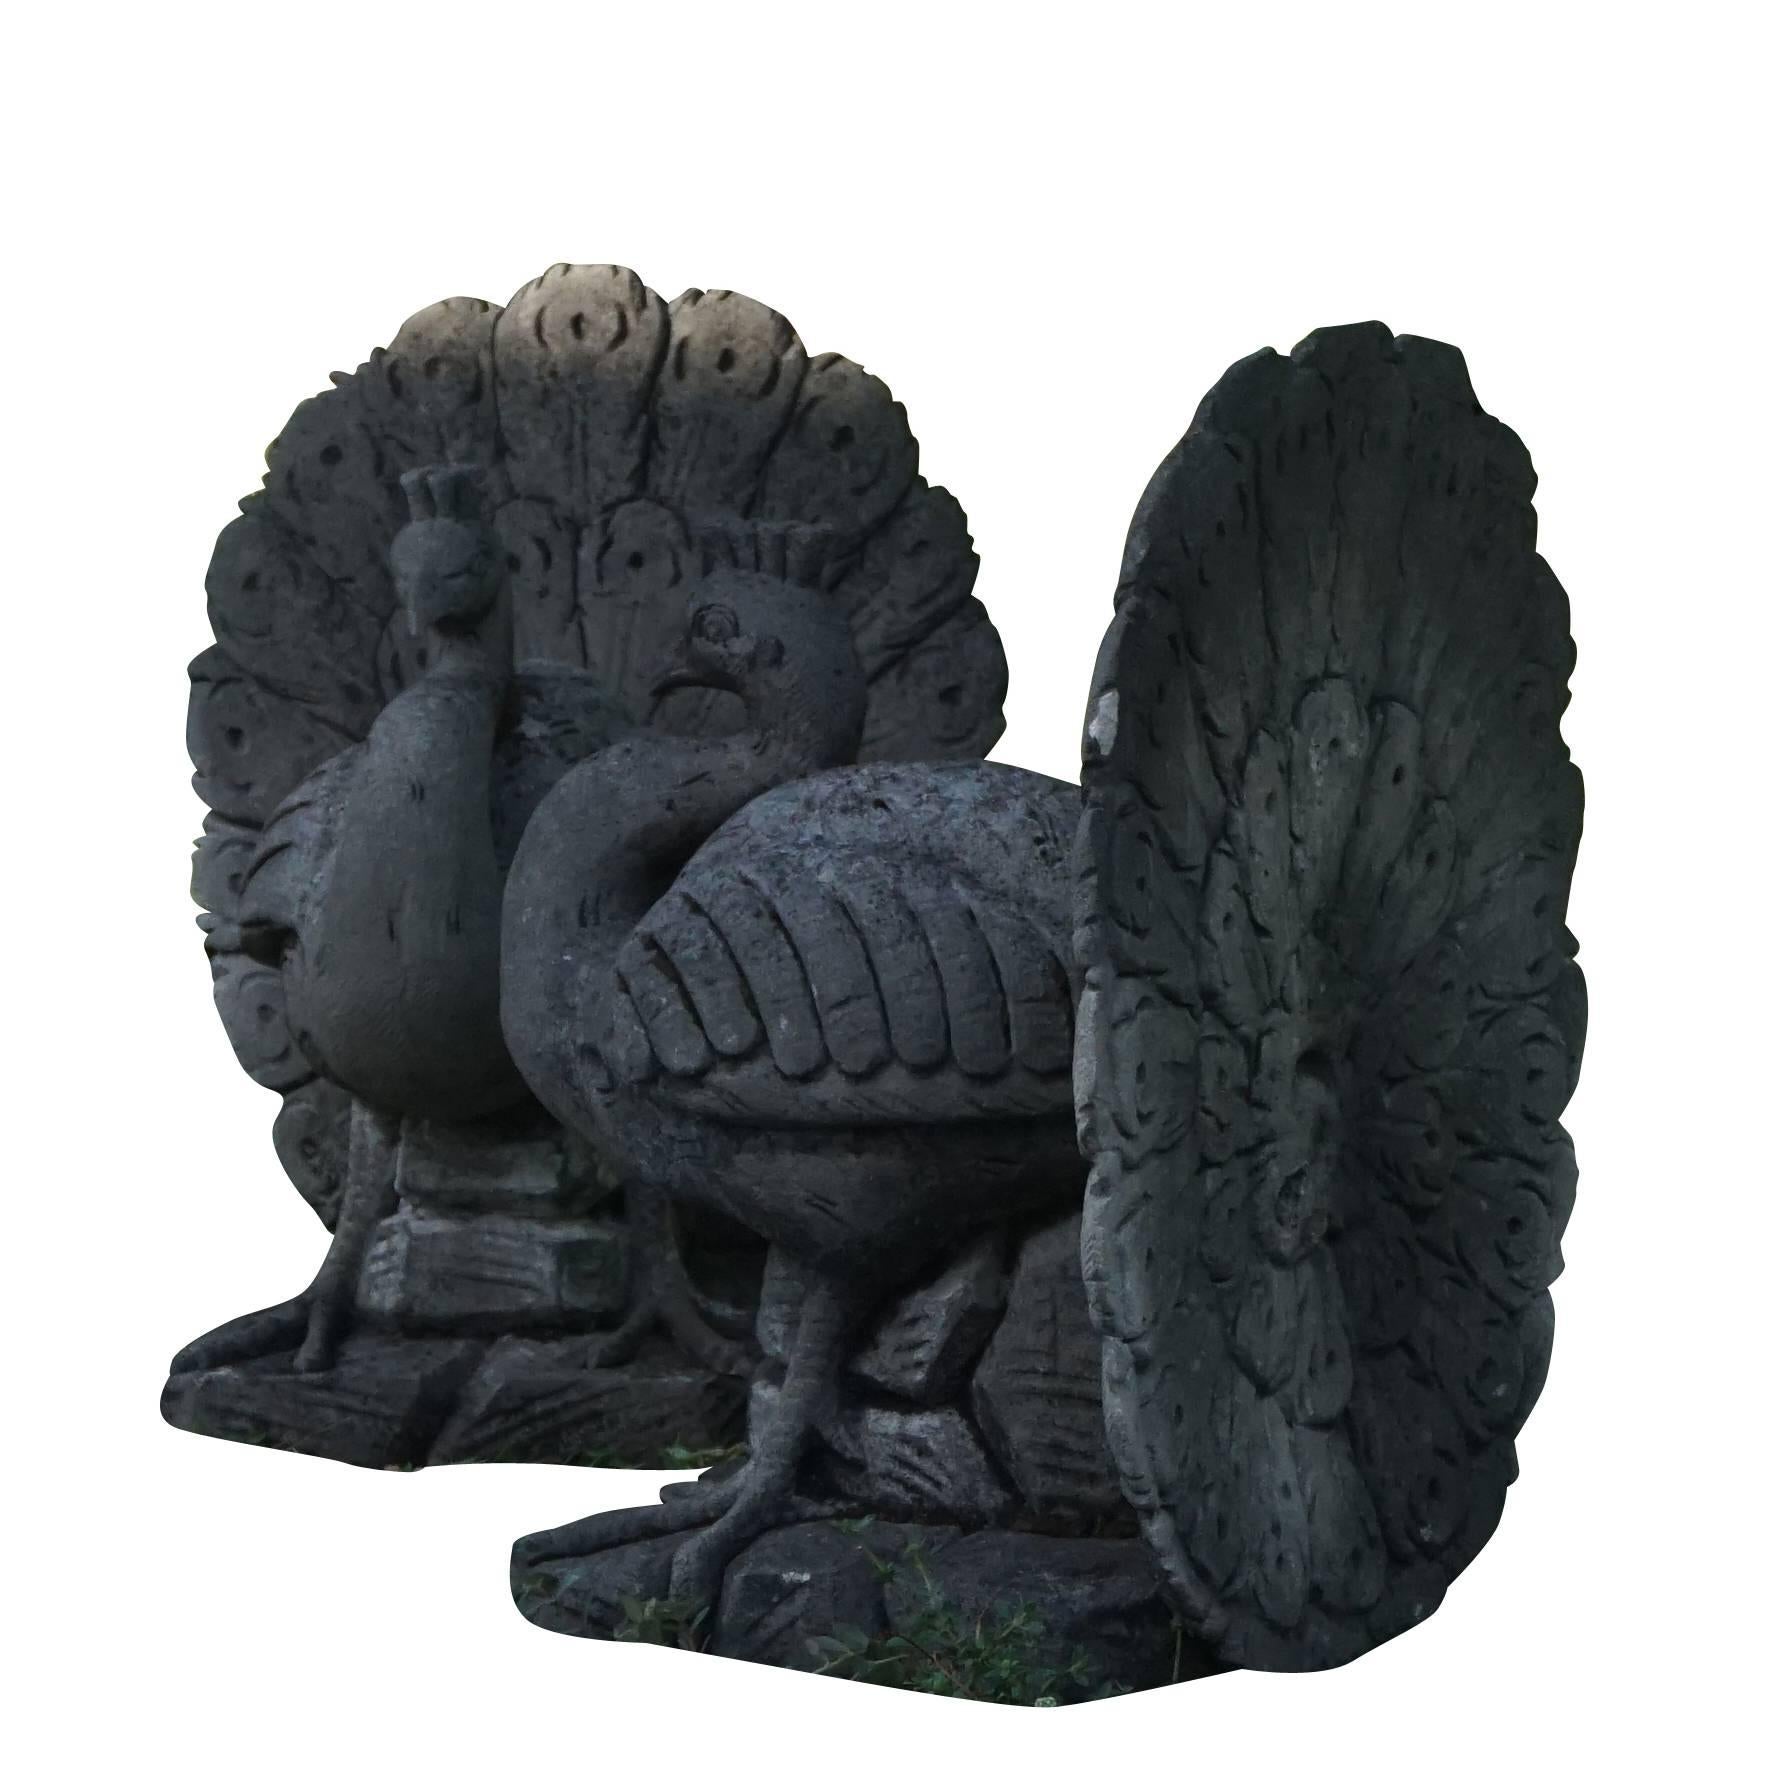 A pair of fan tailed Italian garden peacocks showing their large tail feathers or coverts. Hand carved detailed sculptures executed in limestone on an attached bases, circa 1920. Naturally aged patina.